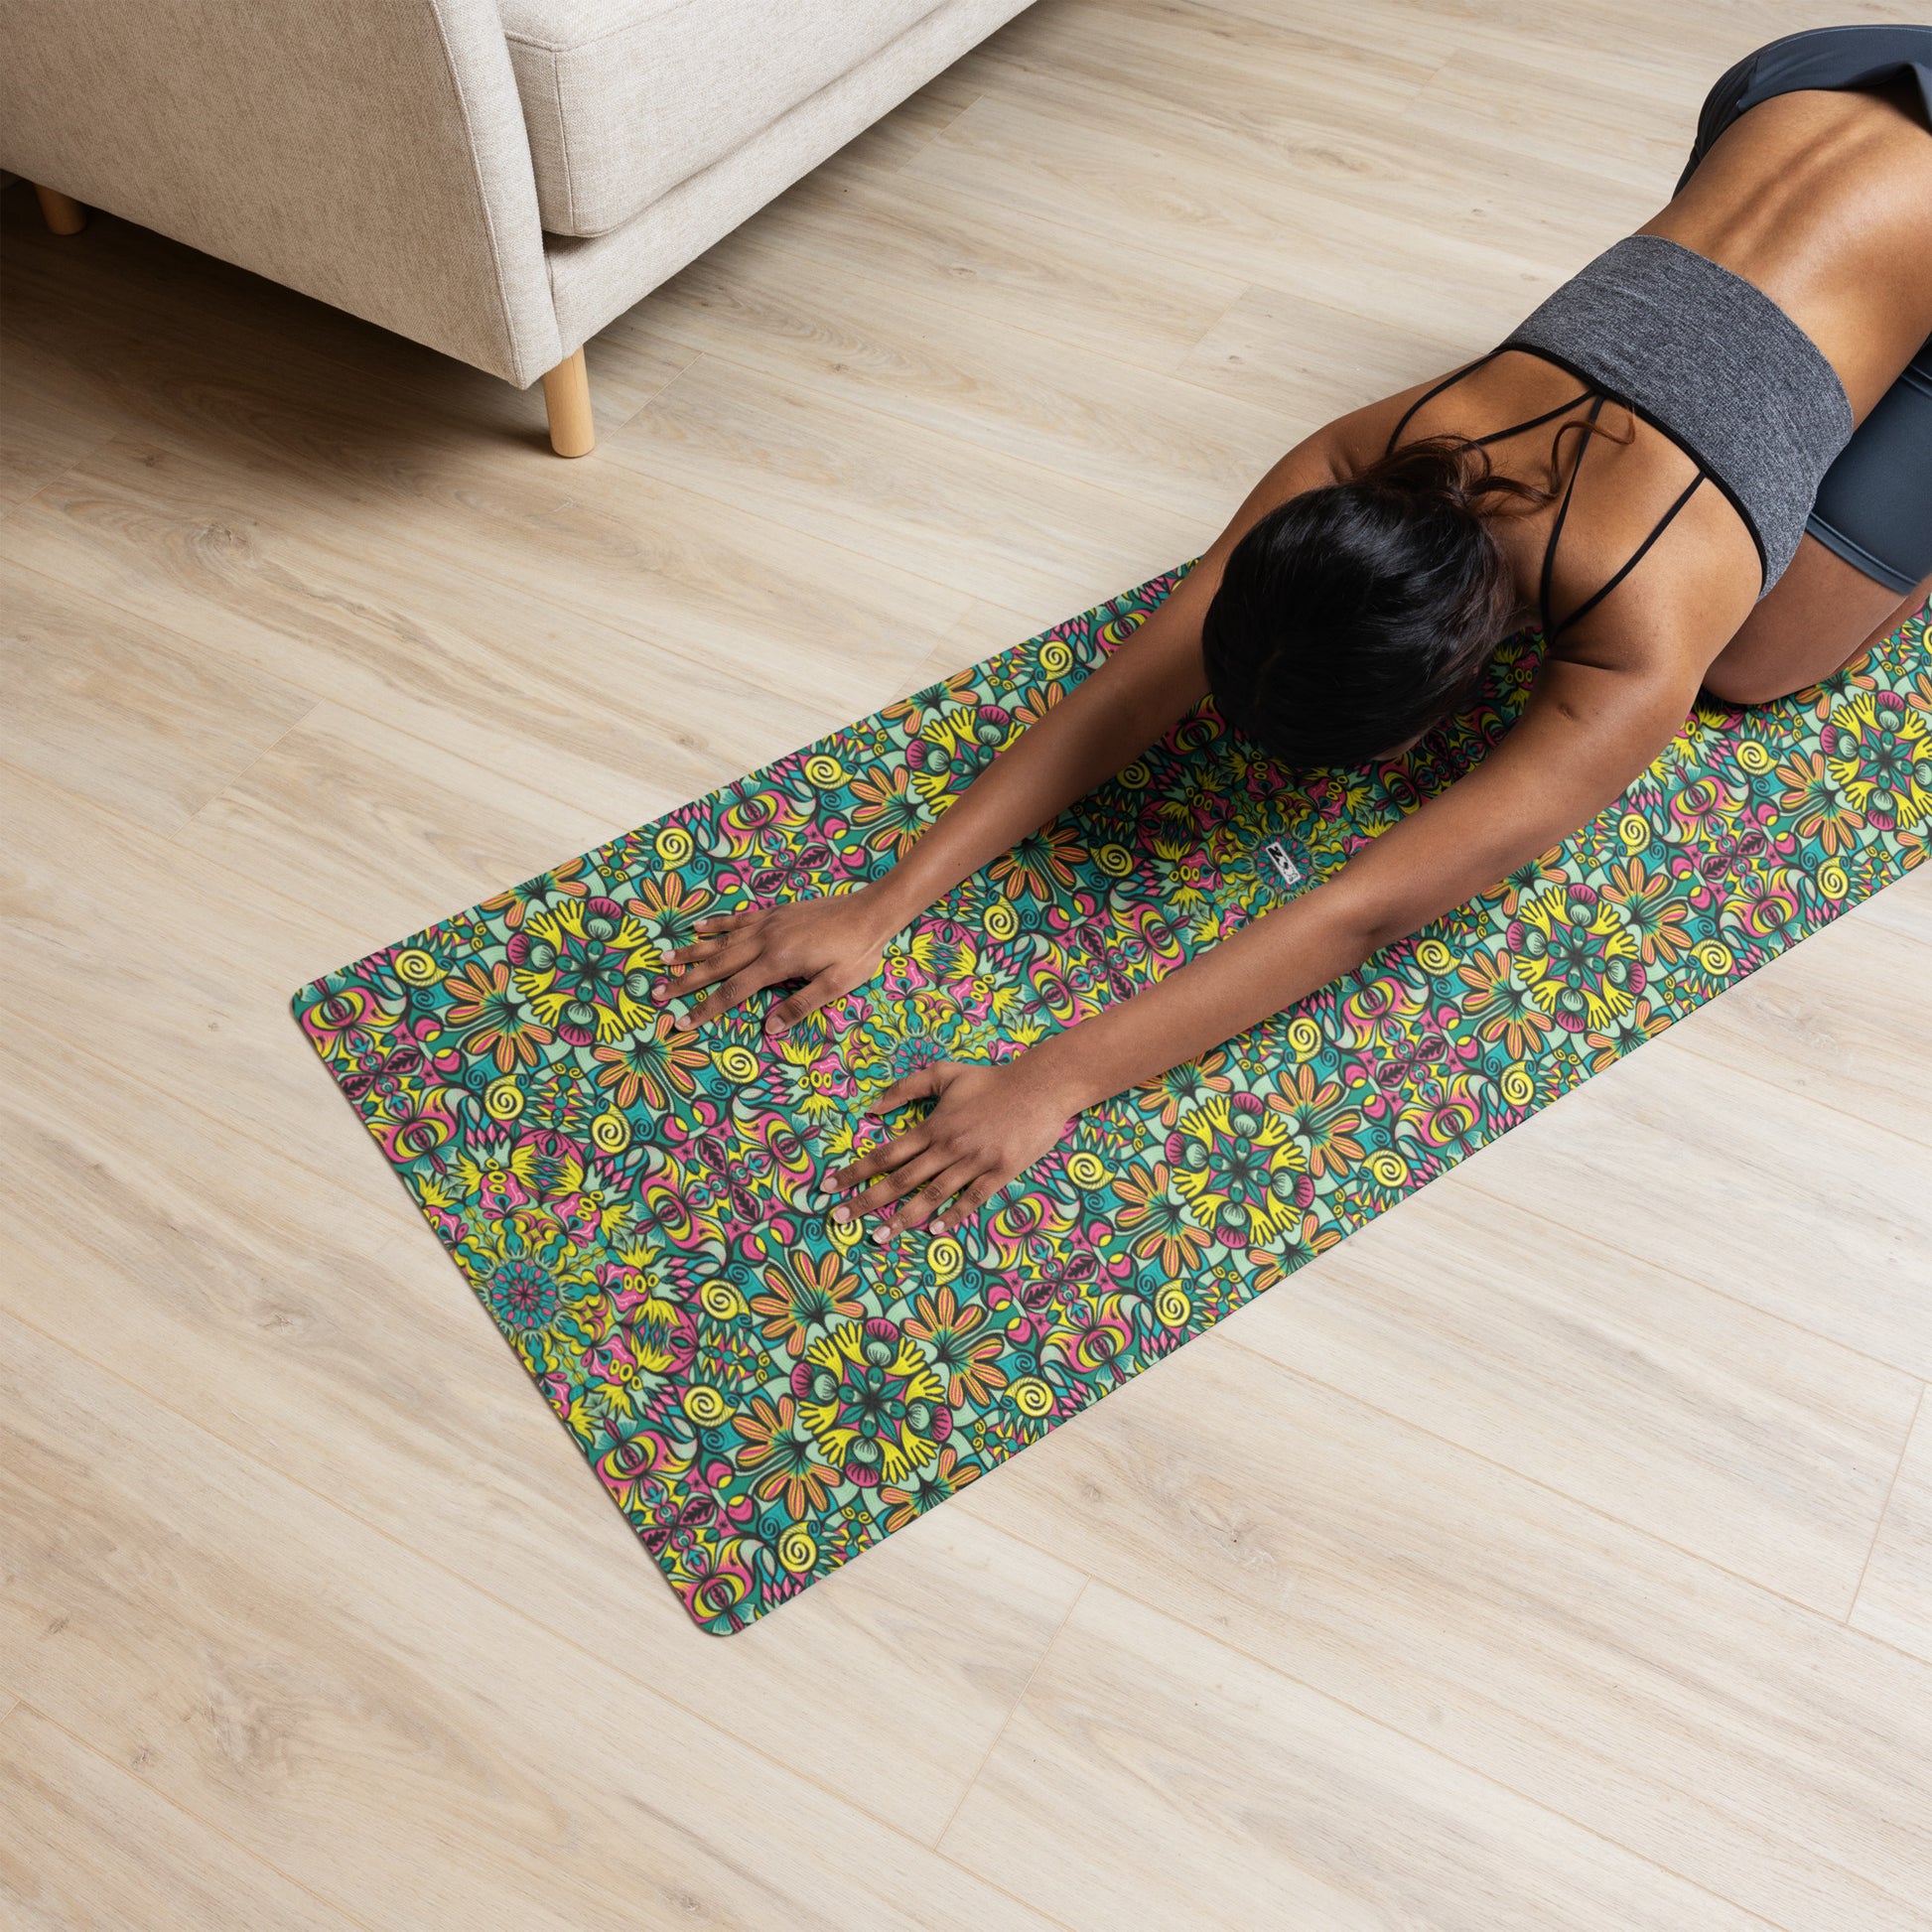 Exploring Jungle Oddities: Inspiration from the Fascinating Wildflowers of the Tropics Yoga mat. Comfort and style